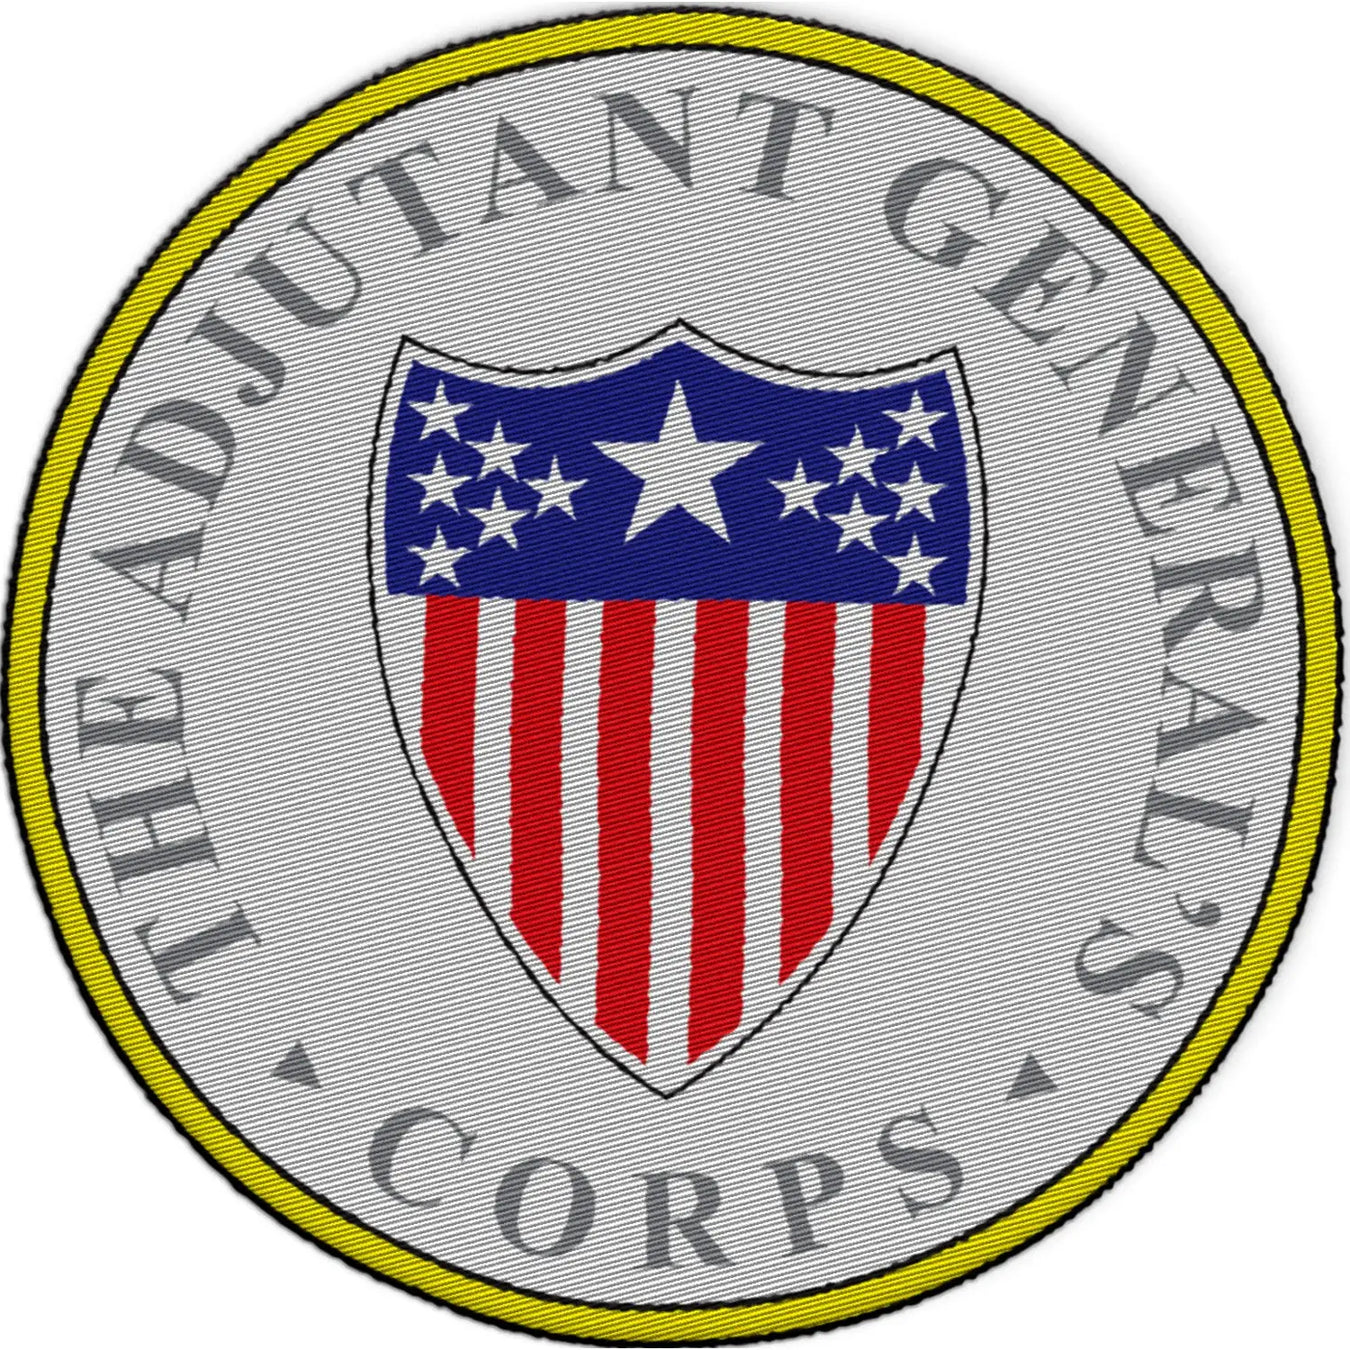 U.S. Army Adjutant General's Corps Patches